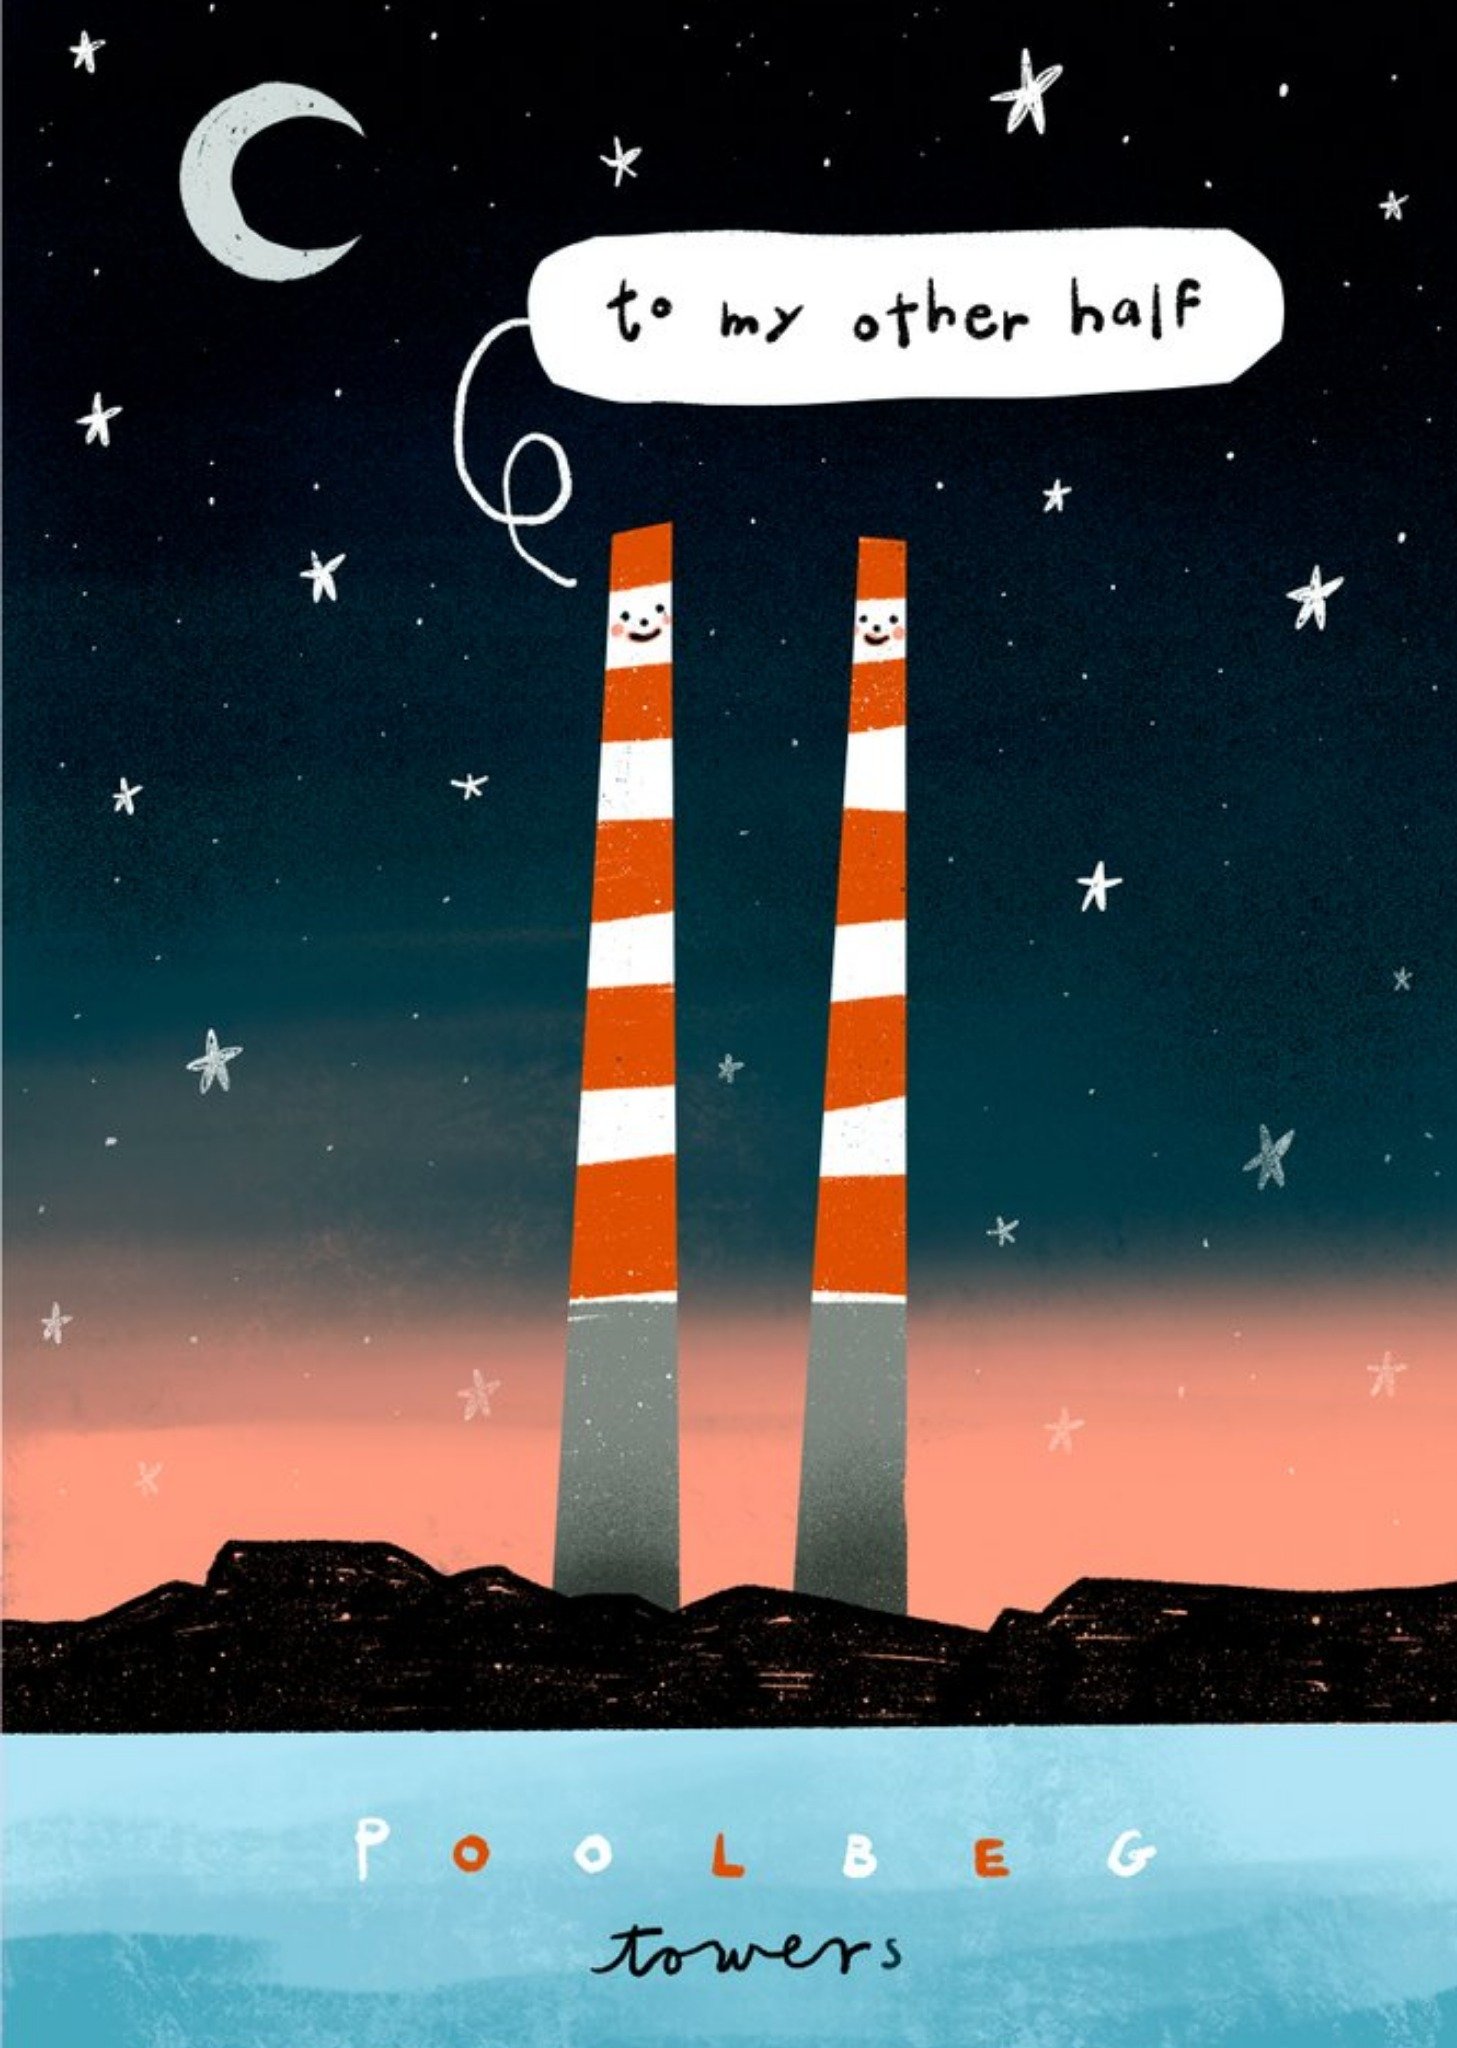 Moonpig Illustrated To My Other Half Poolbeg Towers Just To Say Card, Large